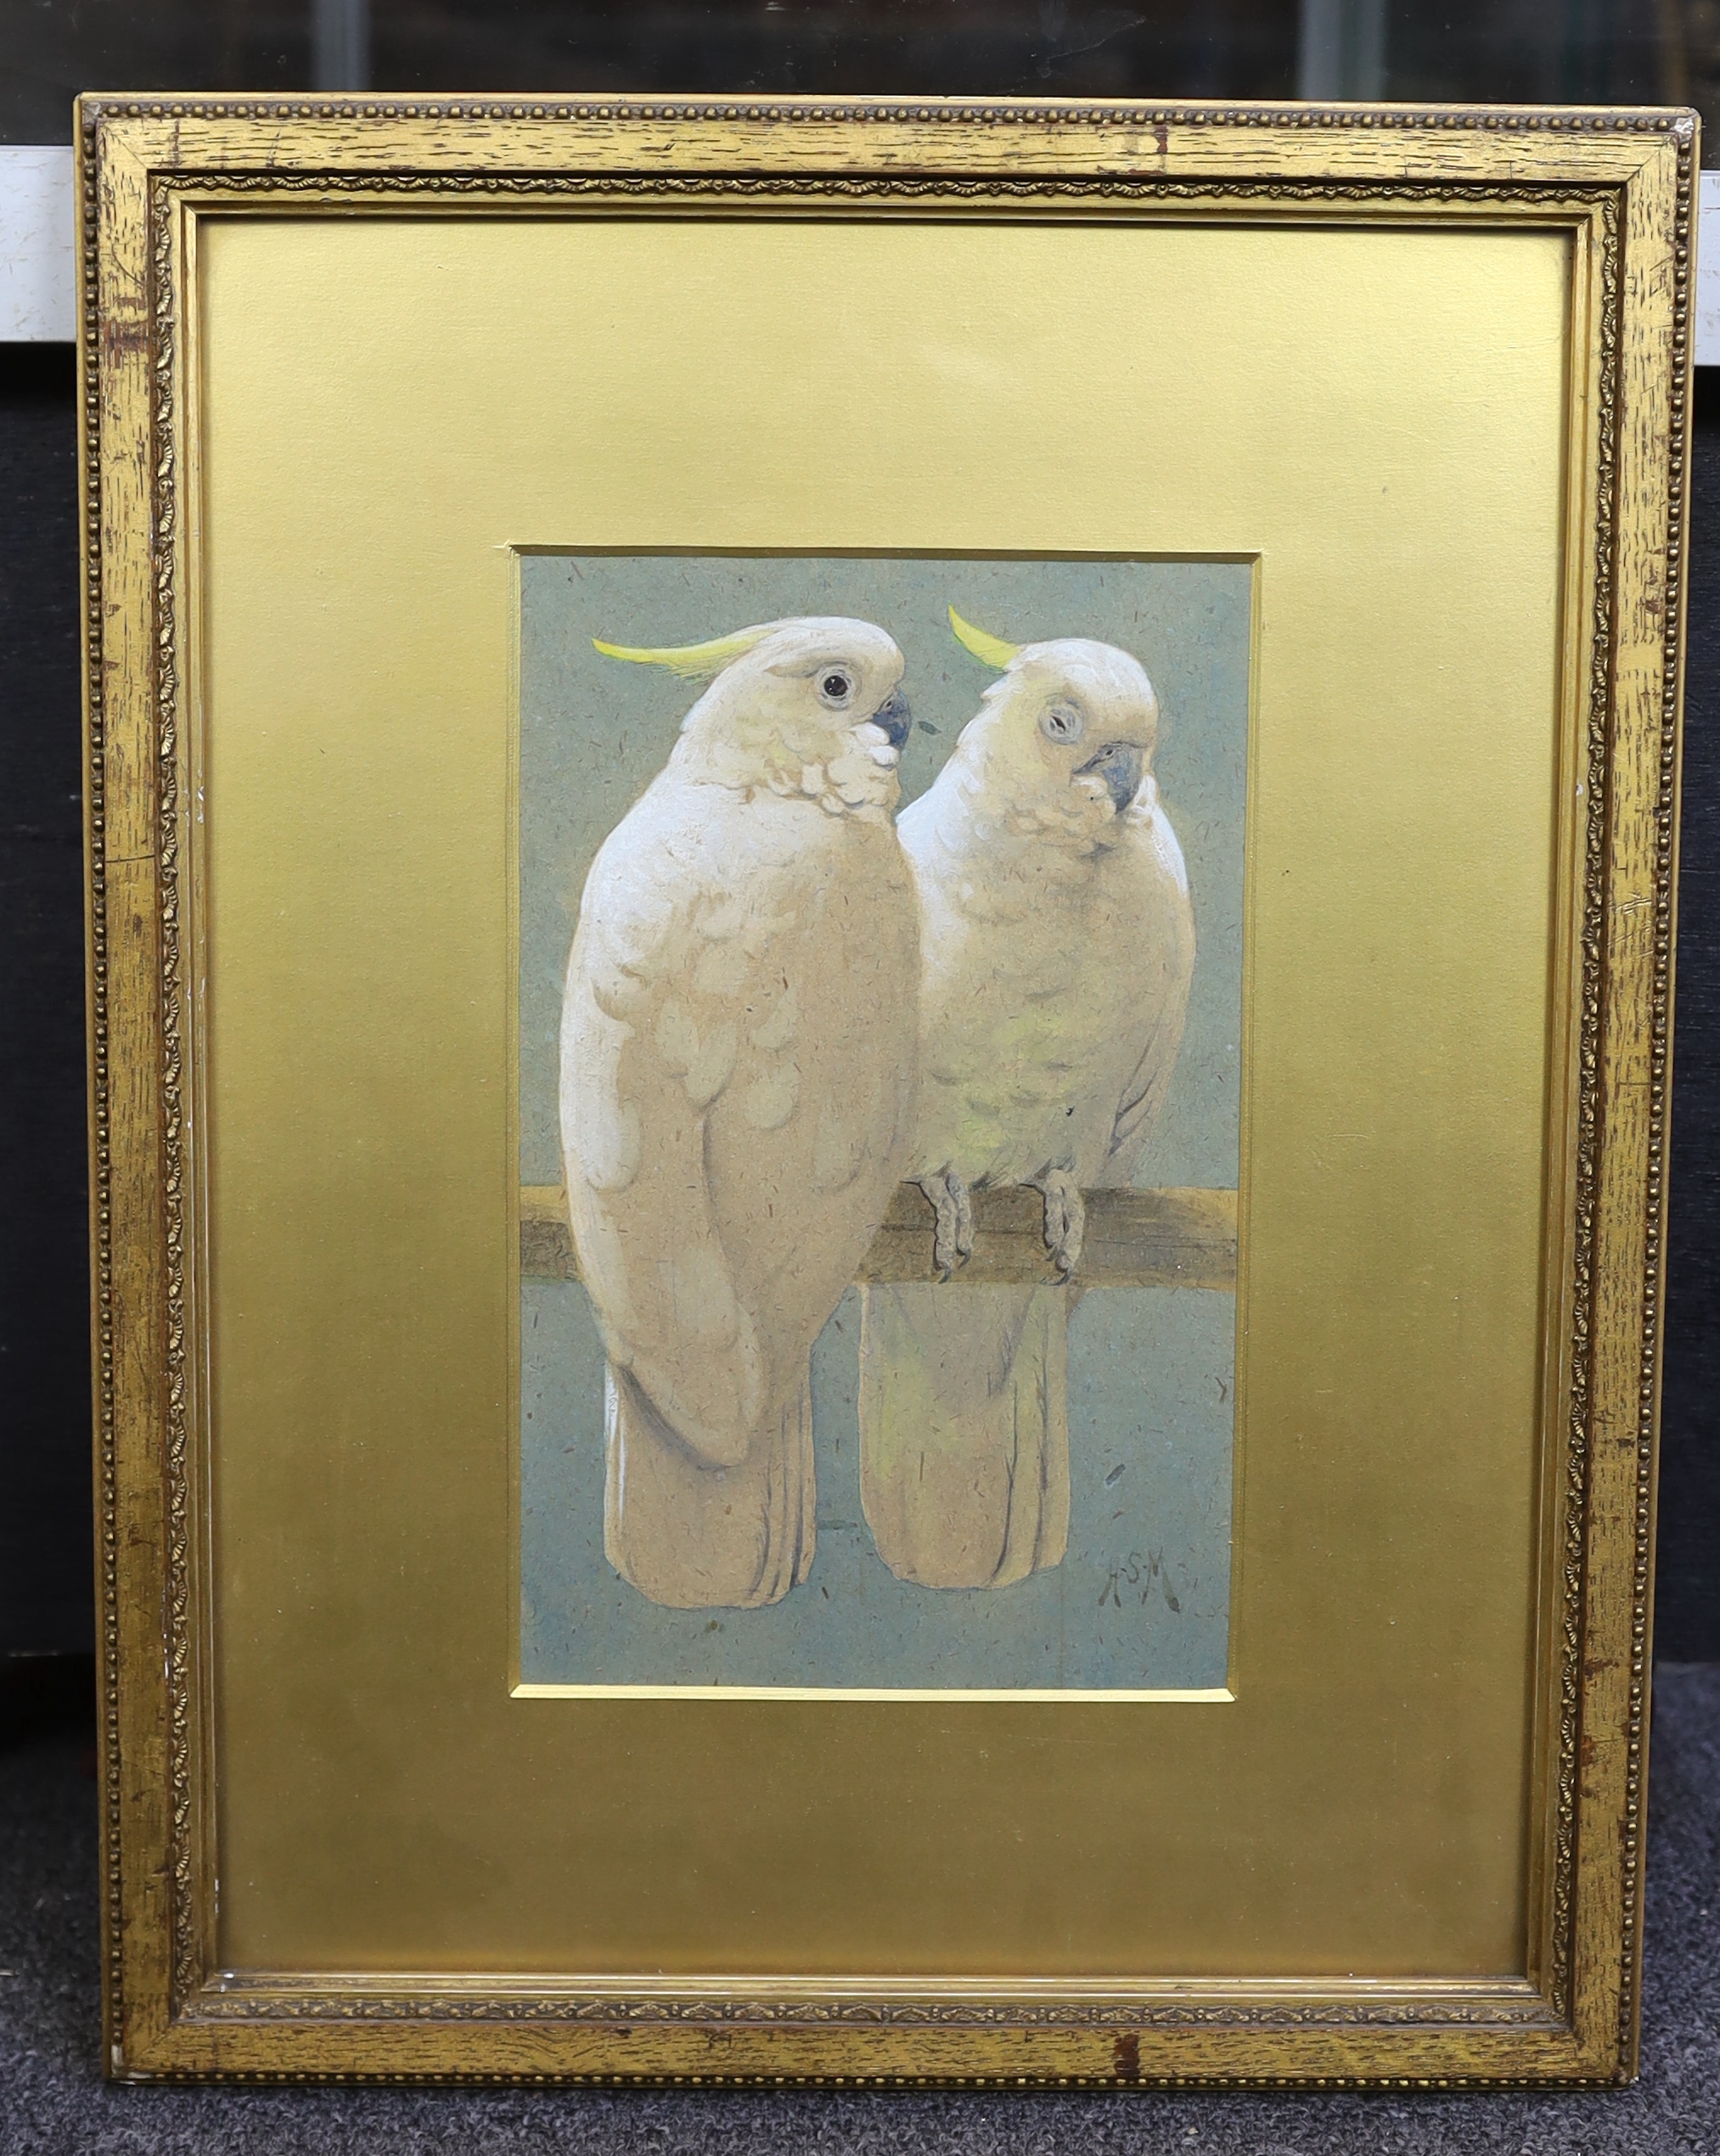 Henry Stacy Marks R.A., (British, 1829-1898), Two cockatoos, watercolour, 24 x 15cm